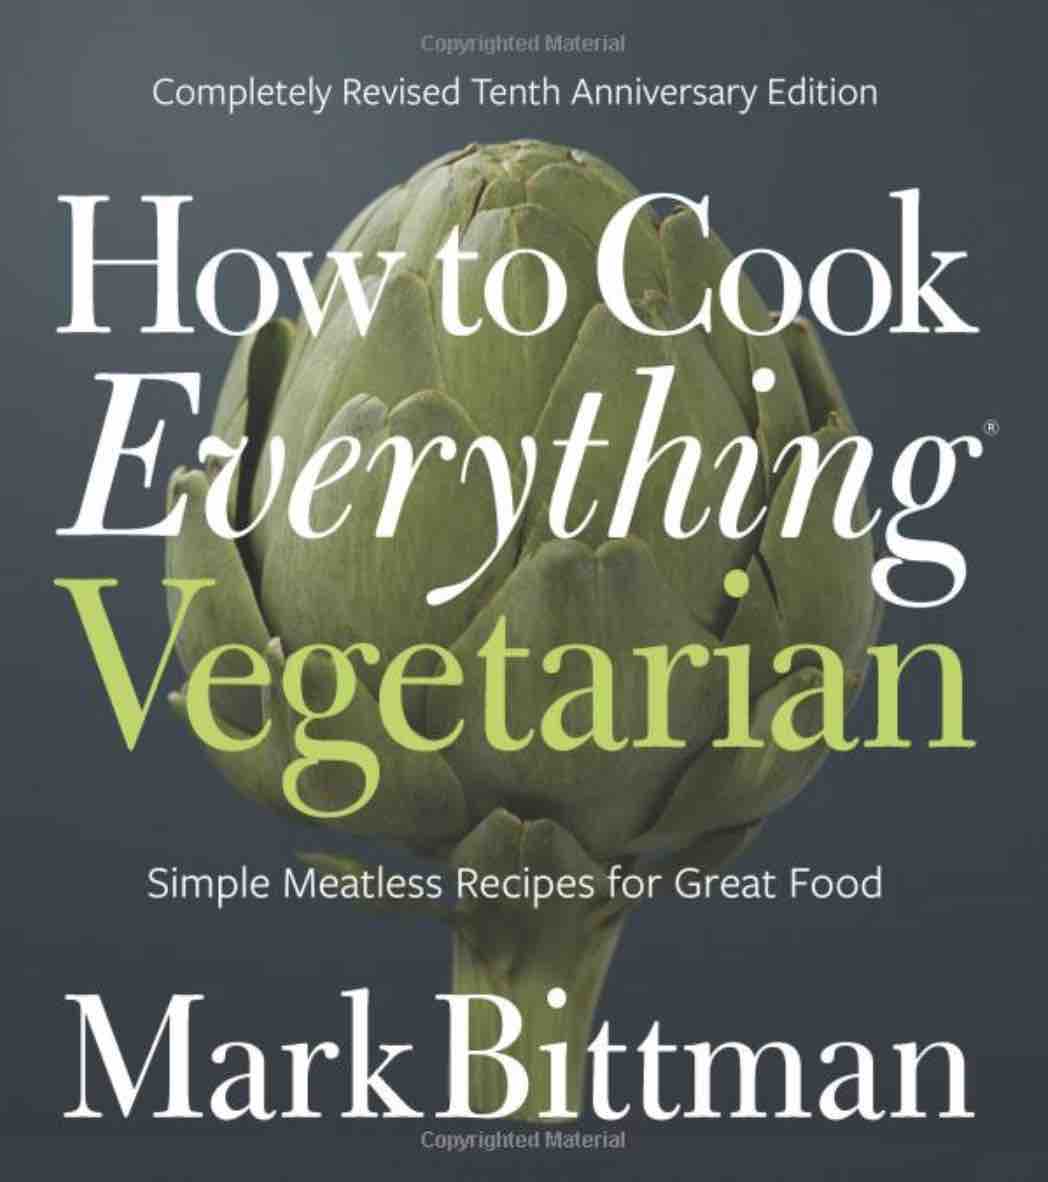 How to Eat Everything Vegetarian Book Cover